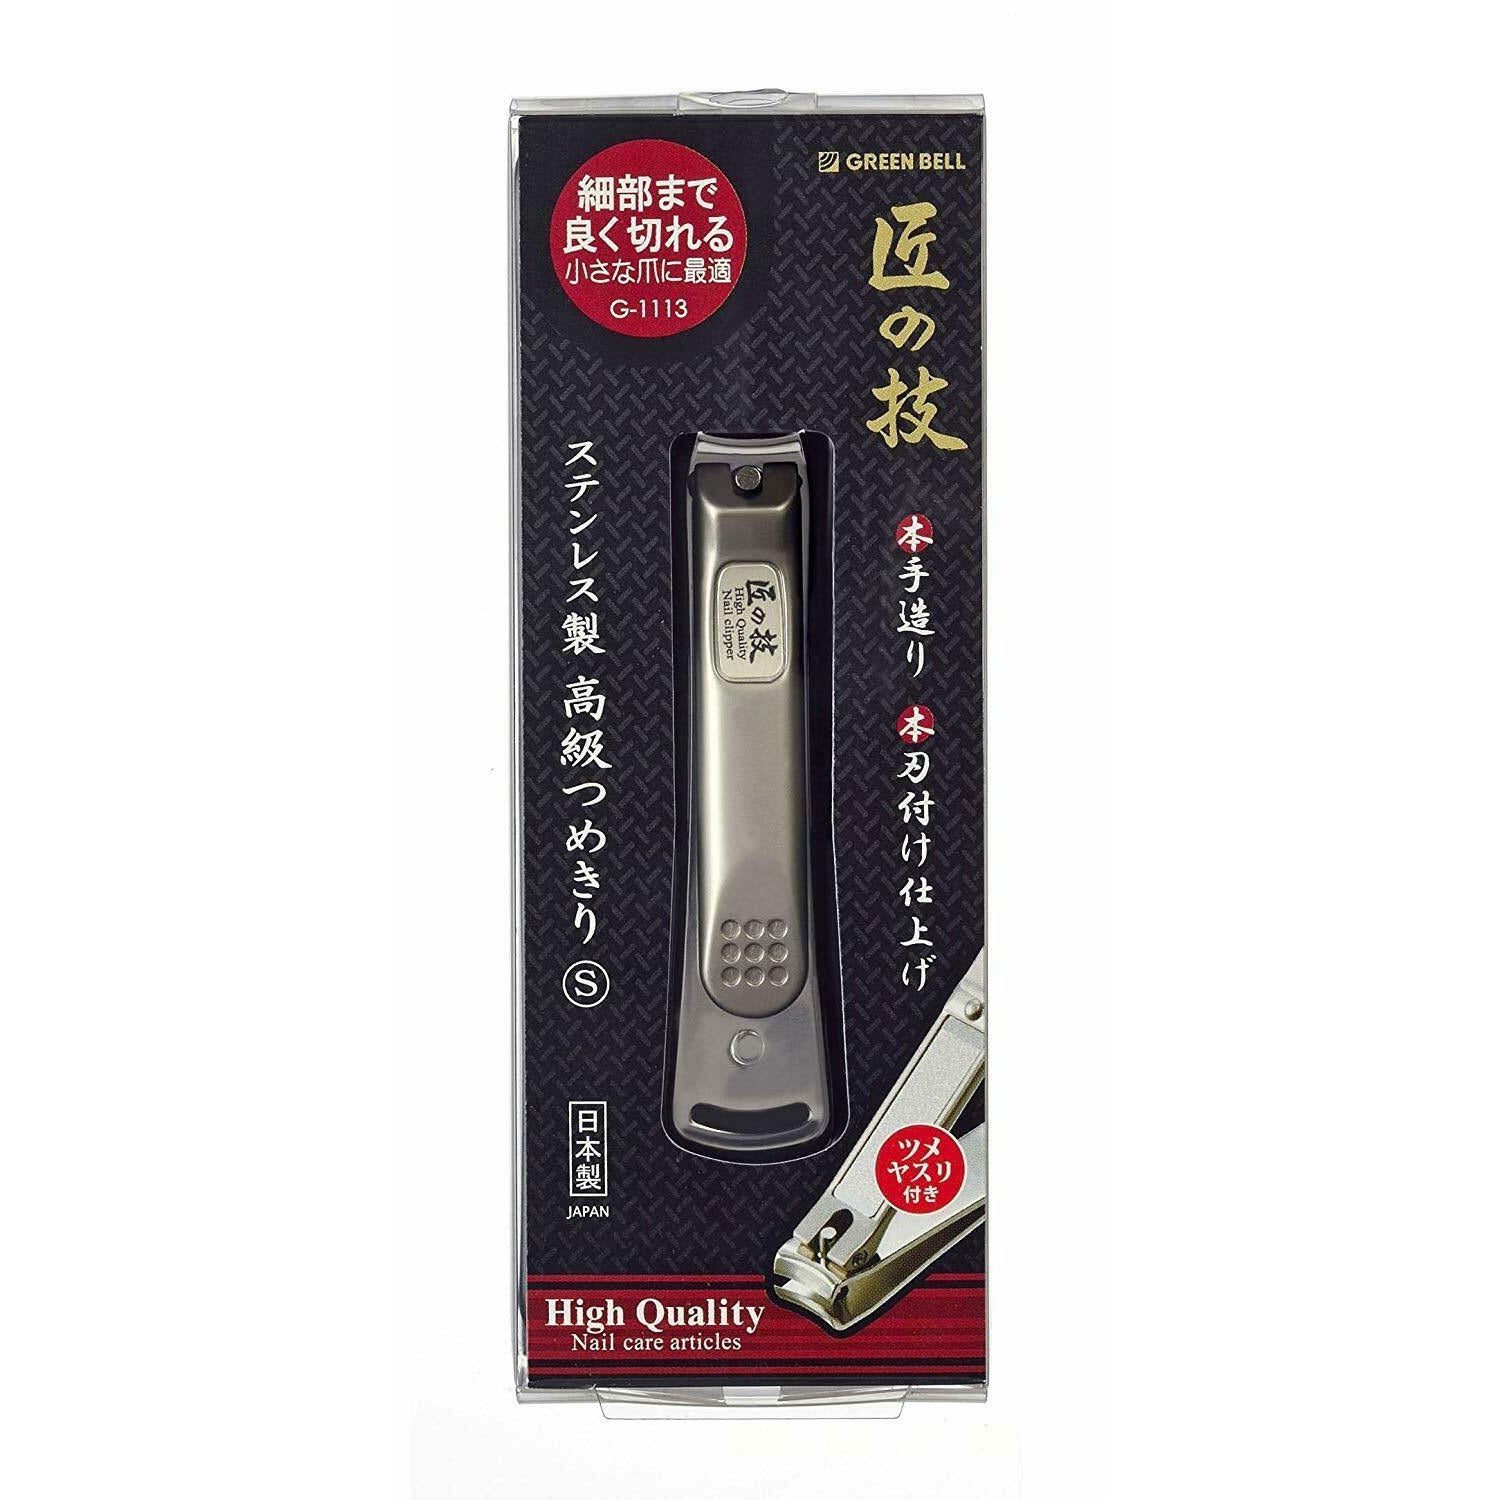 Japan HIgh Quality Green Bell G-1113 Stainless Steel Luxury Nail Clippers S